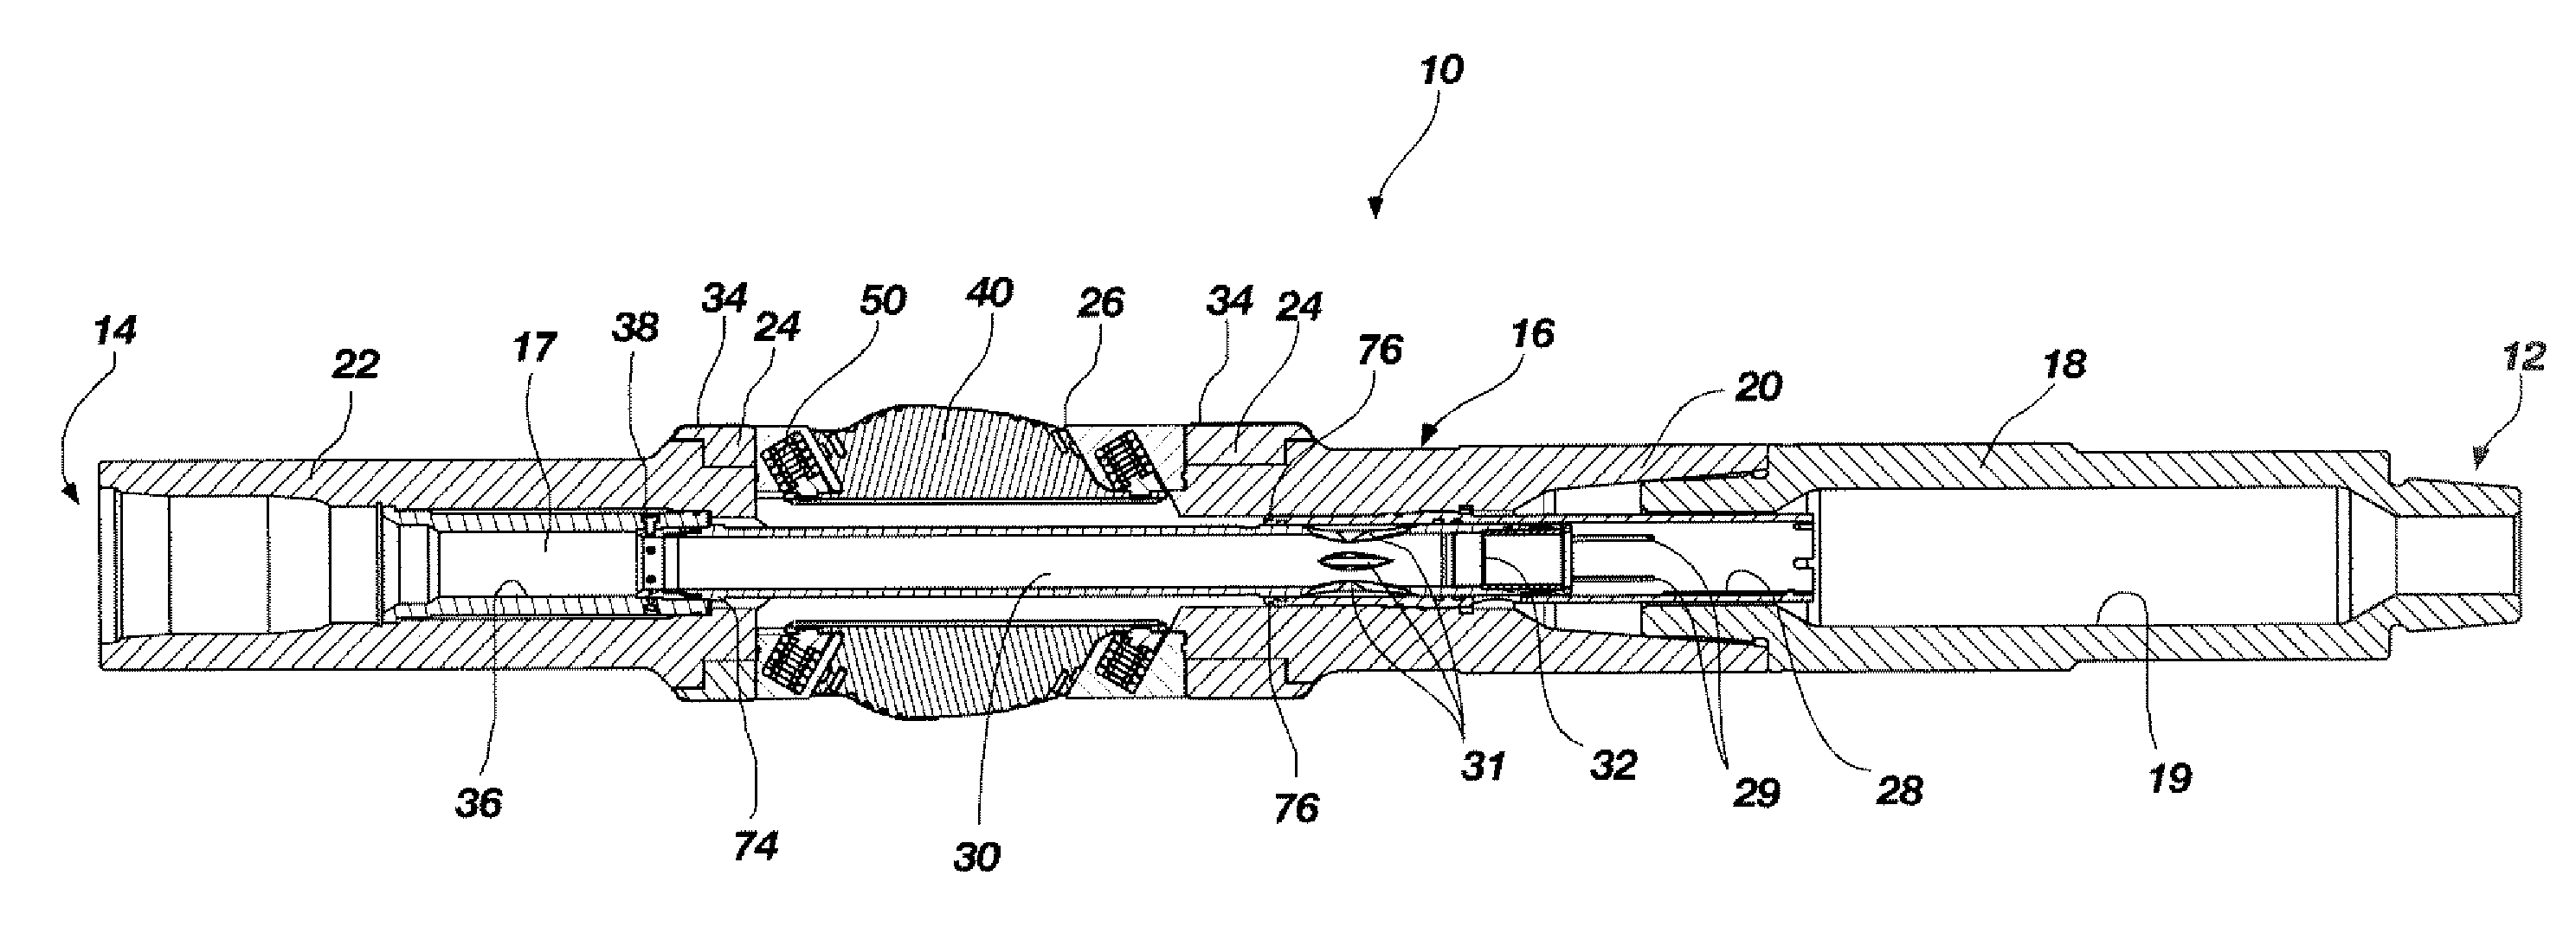 Expandable reamers for earth-boring applications and methods of using the same